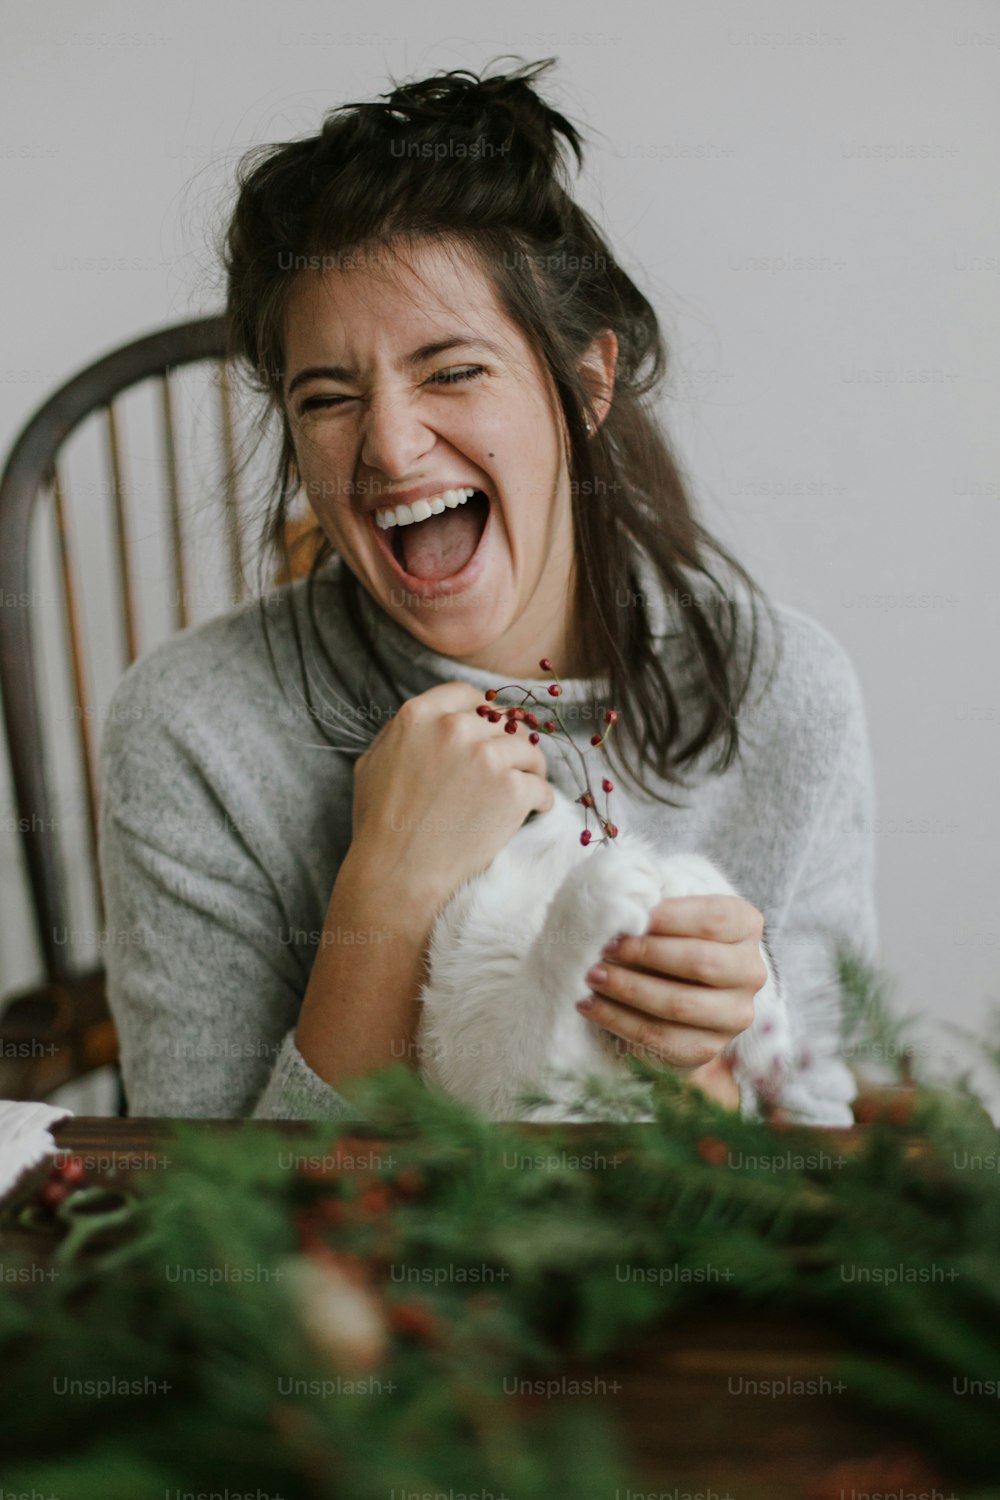 Cute cat helping young happy woman making rustic christmas wreath, holding red berries and green branches. Funny authentic home moments, pet and holidays. Woman laughing with little helper